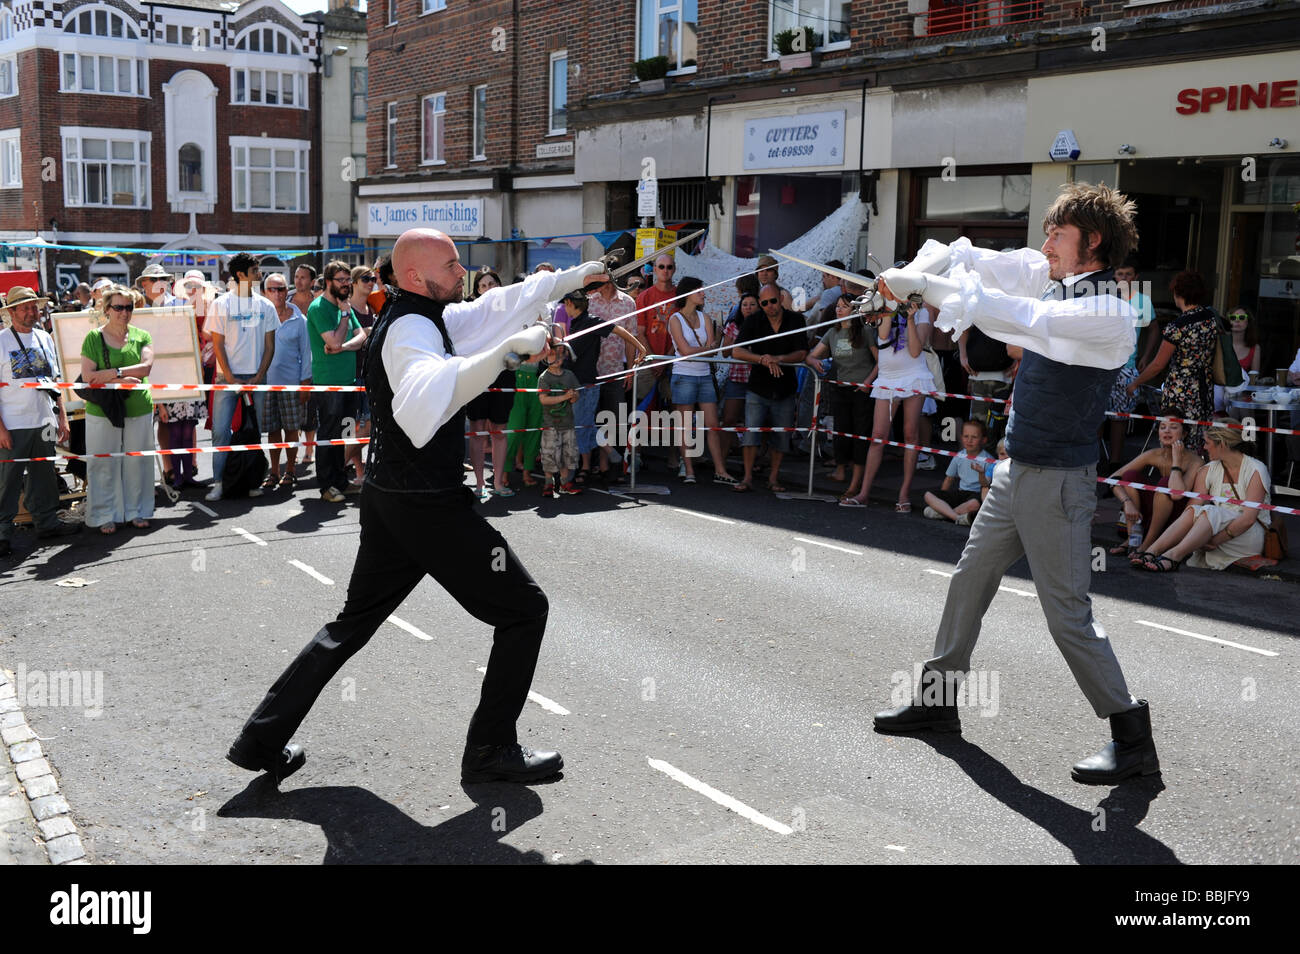 Sword fighting demonstration at the Sunflower Street Party in Kemp town Brighton UK Stock Photo